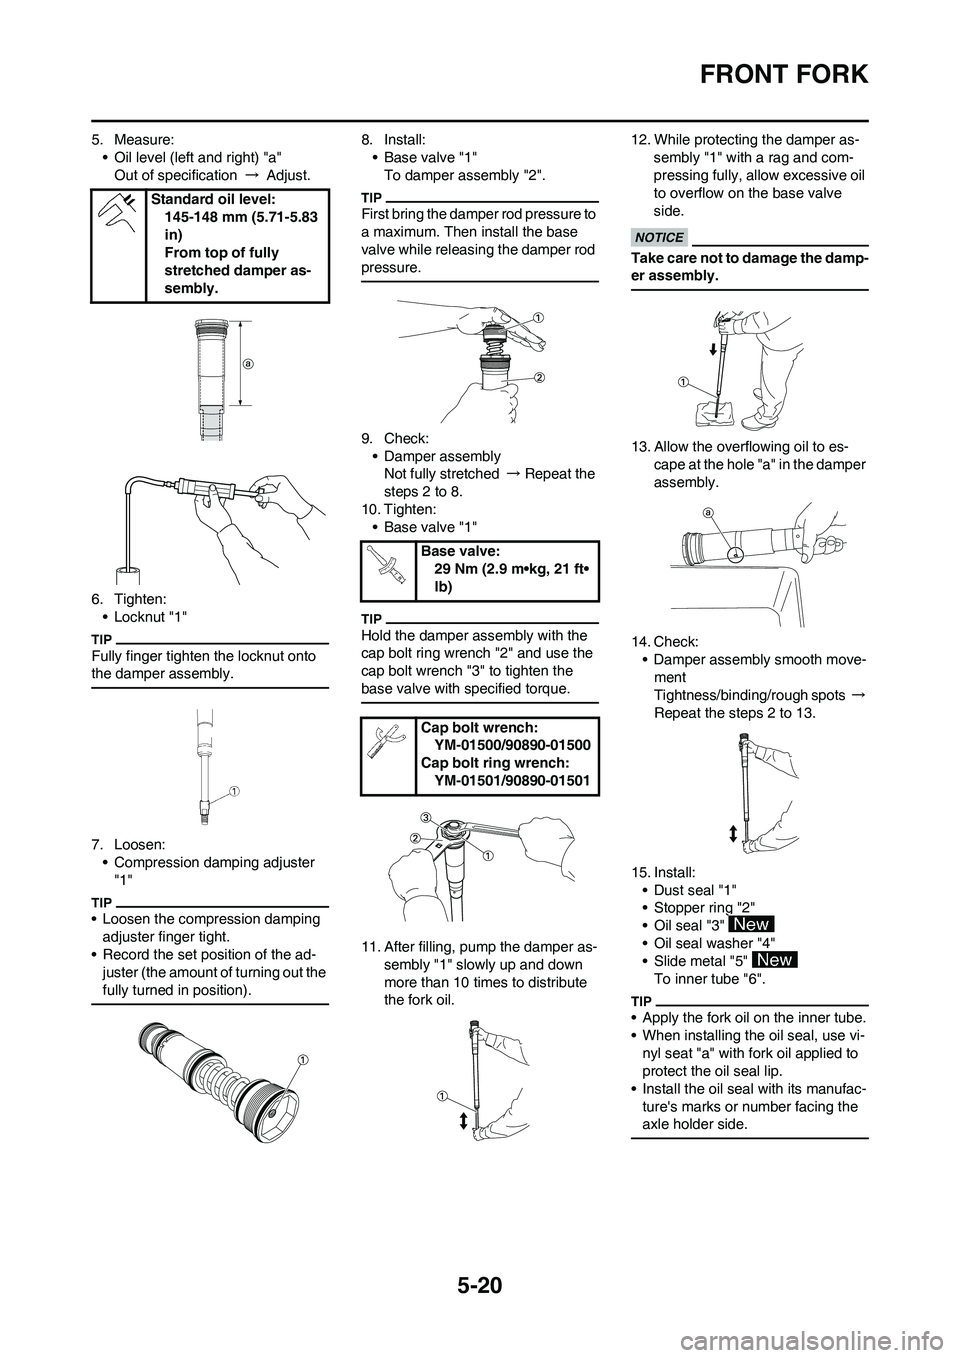 YAMAHA YZ450F 2010  Owners Manual 5-20
FRONT FORK
5. Measure:
• Oil level (left and right) "a"
Out of specification → Adjust.
6. Tighten:
• Locknut "1"
Fully finger tighten the locknut onto 
the damper assembly.
7. Loosen:
• C